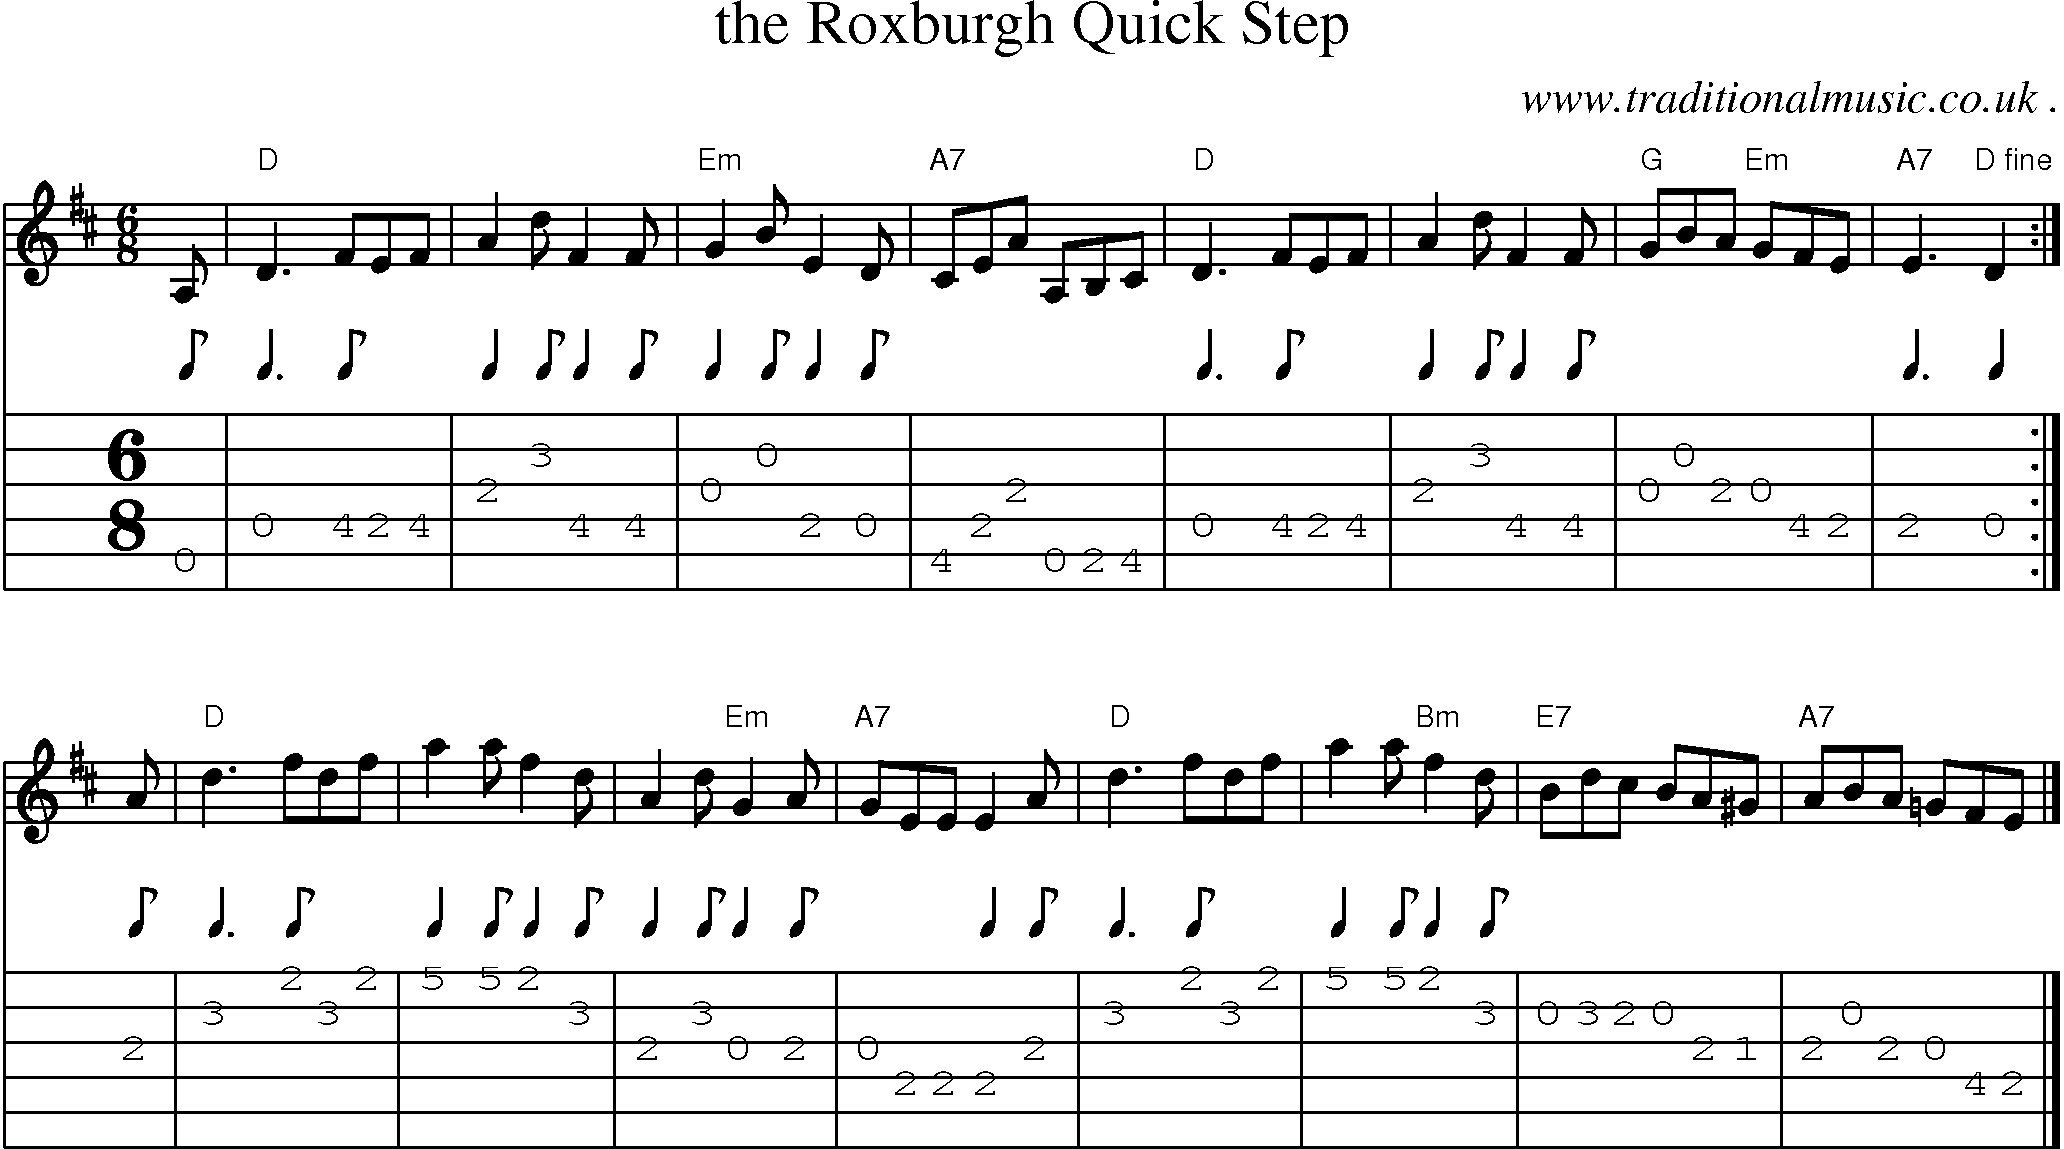 Sheet-music  score, Chords and Guitar Tabs for The Roxburgh Quick Step